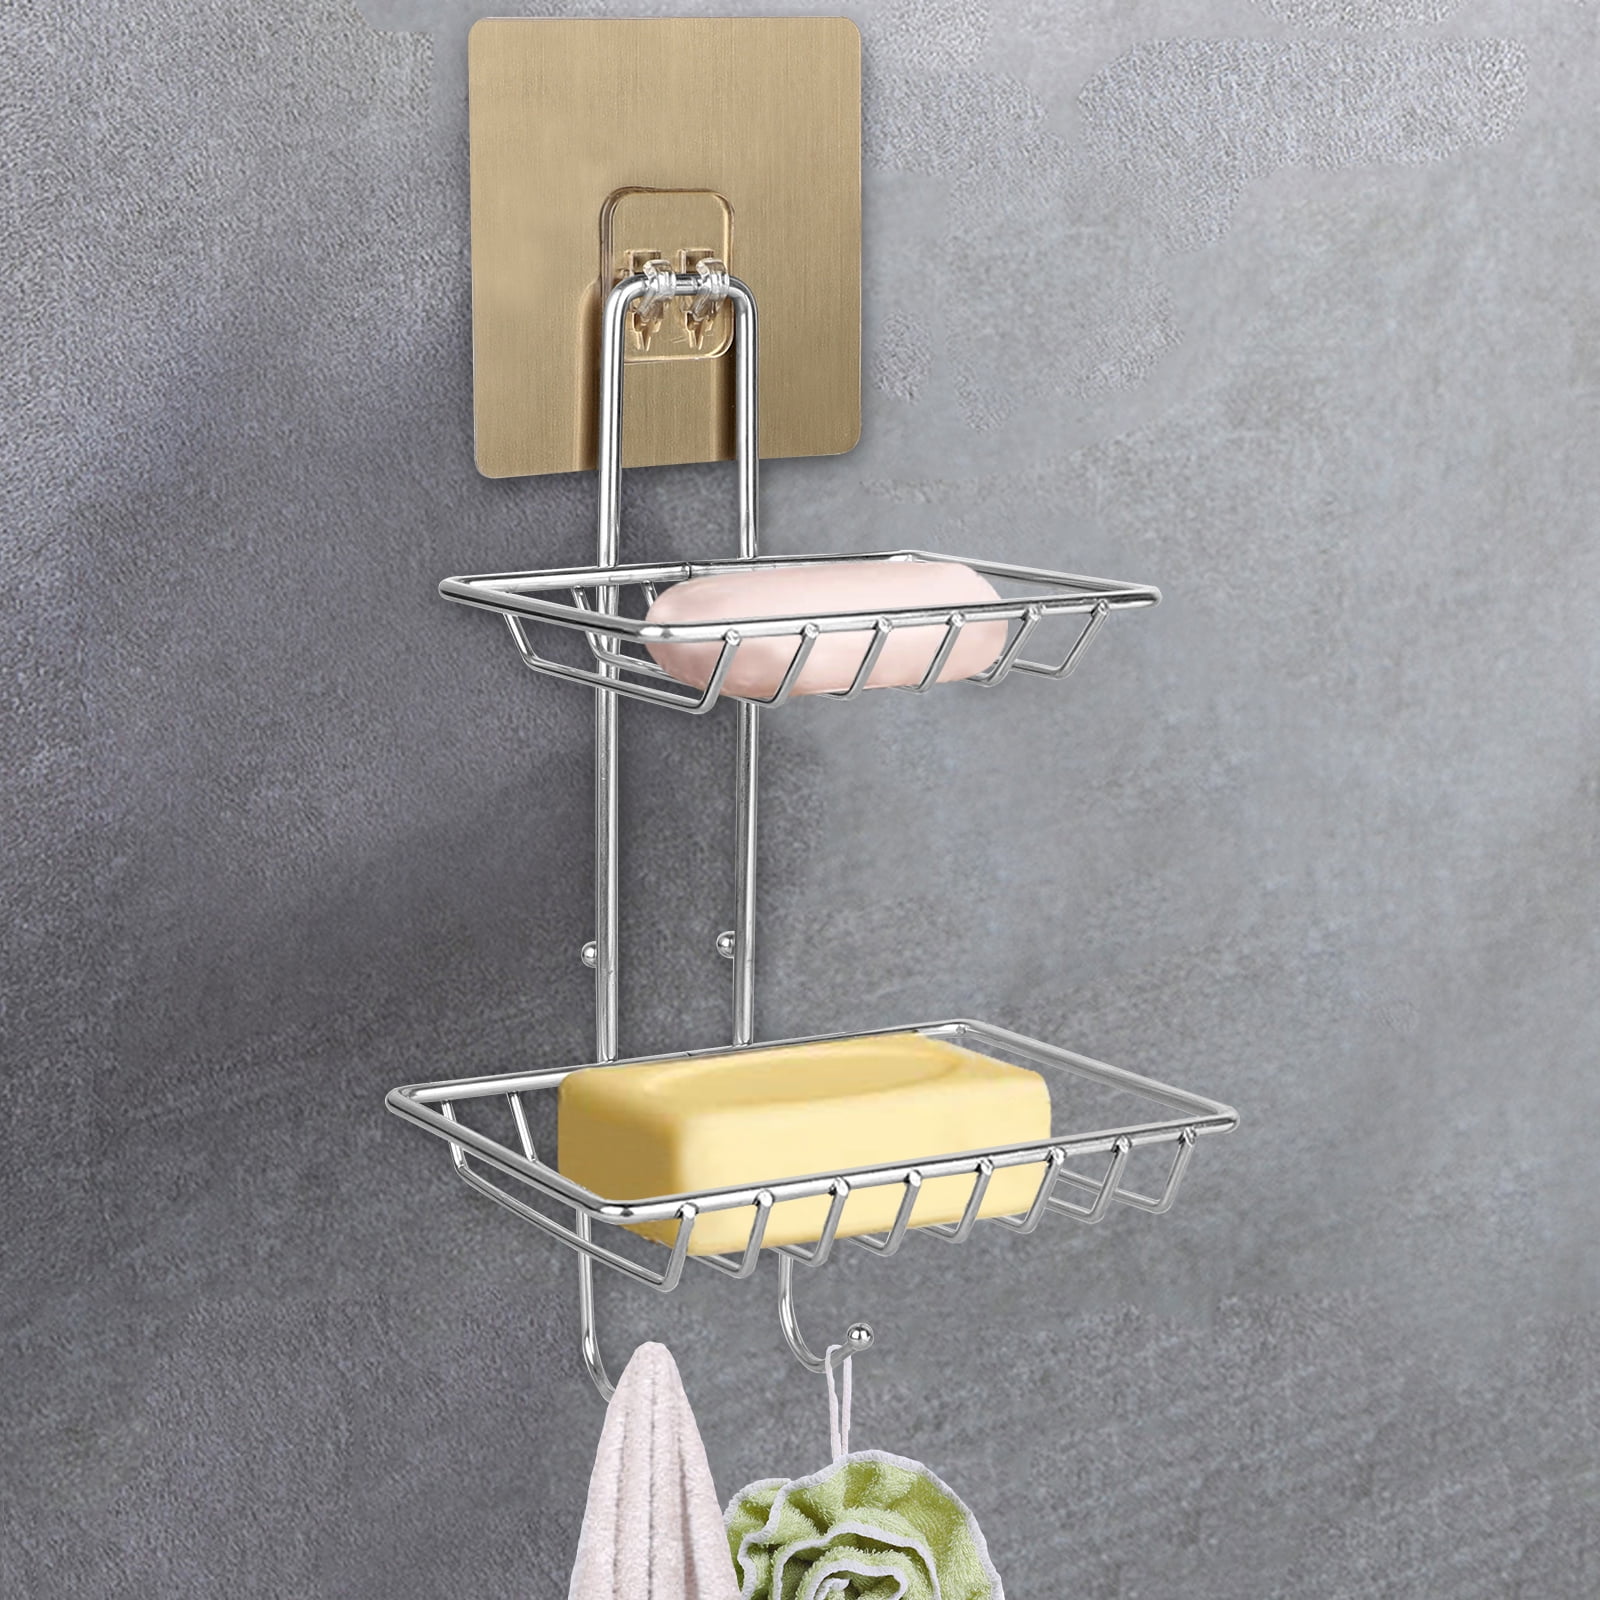 Phone No Trace Paste Wall Mount Soap Holder Soap Box Free-Hanging Drain Rack 